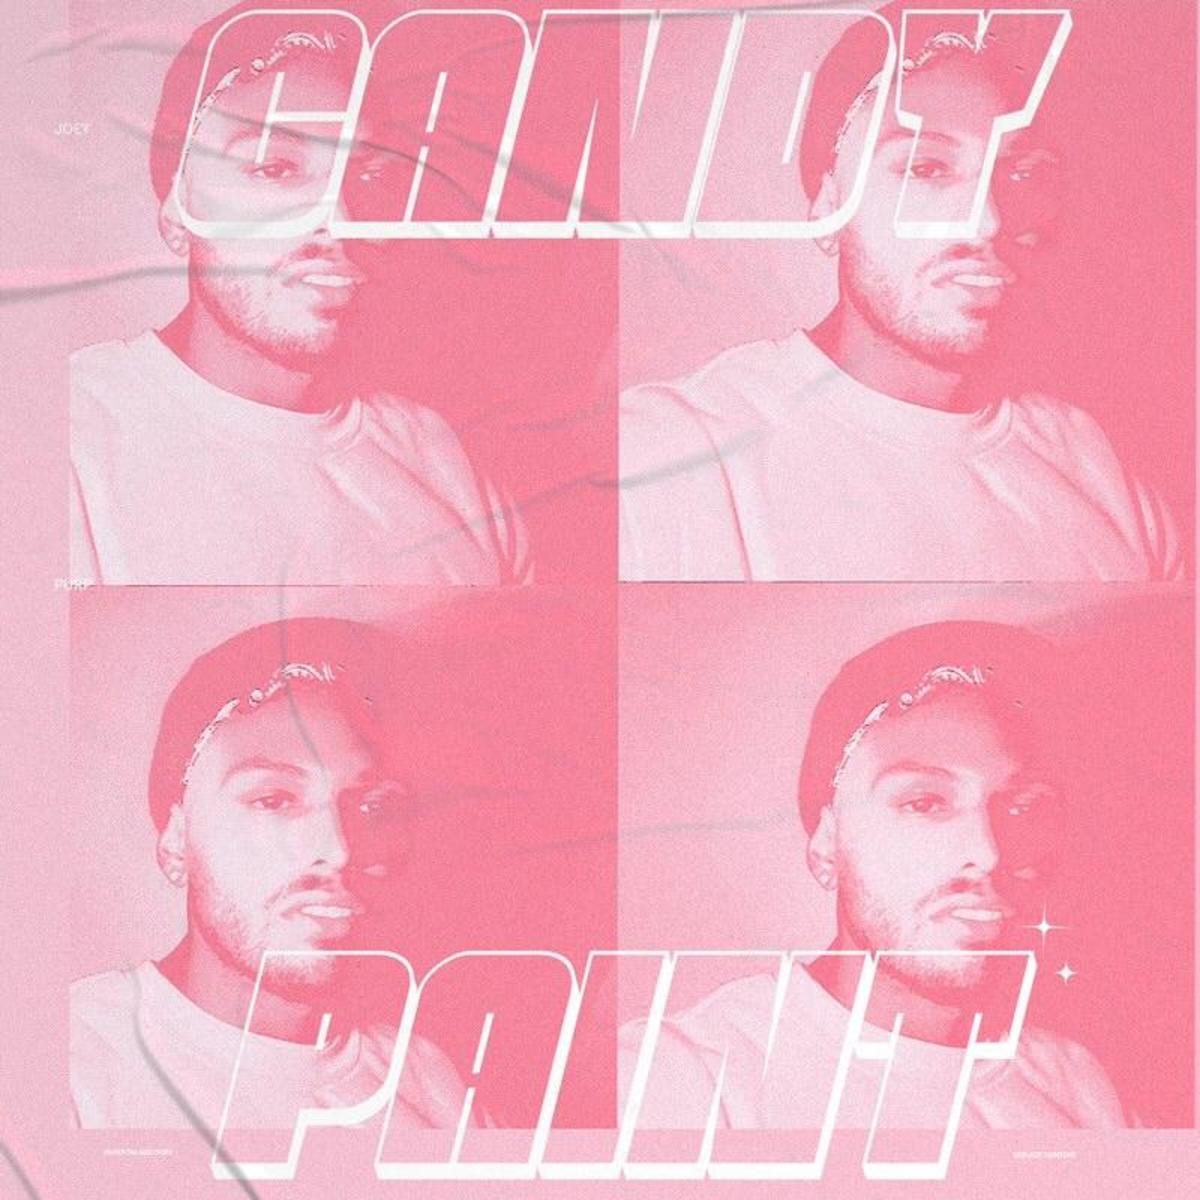 Joey Purp - CANDYPAINT